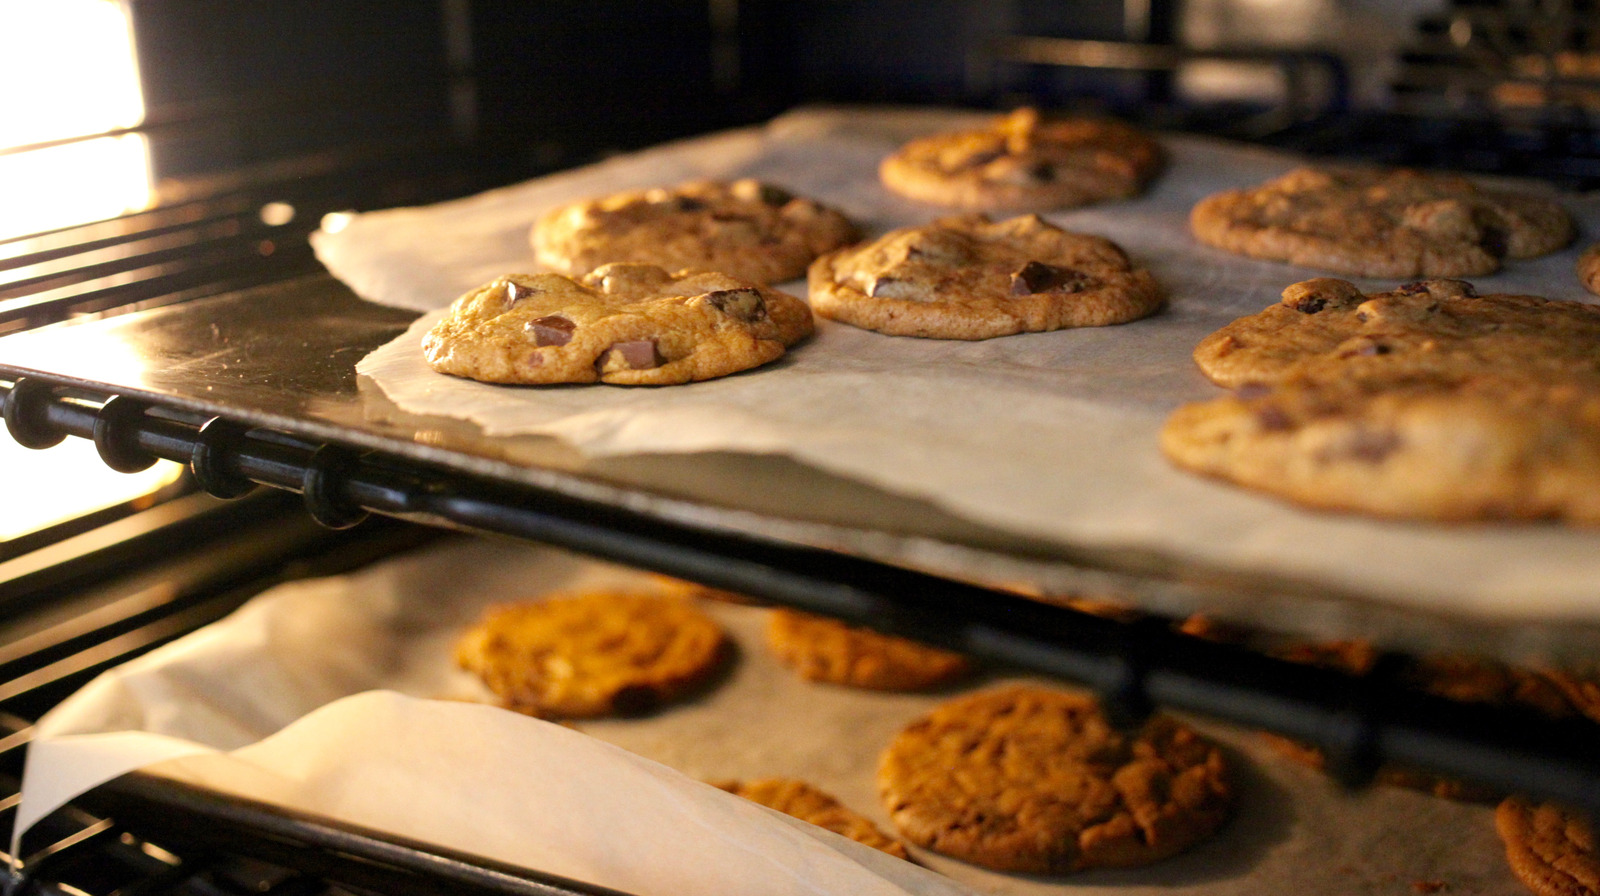 Are Cookie Sheets And Sheet Pans Different?